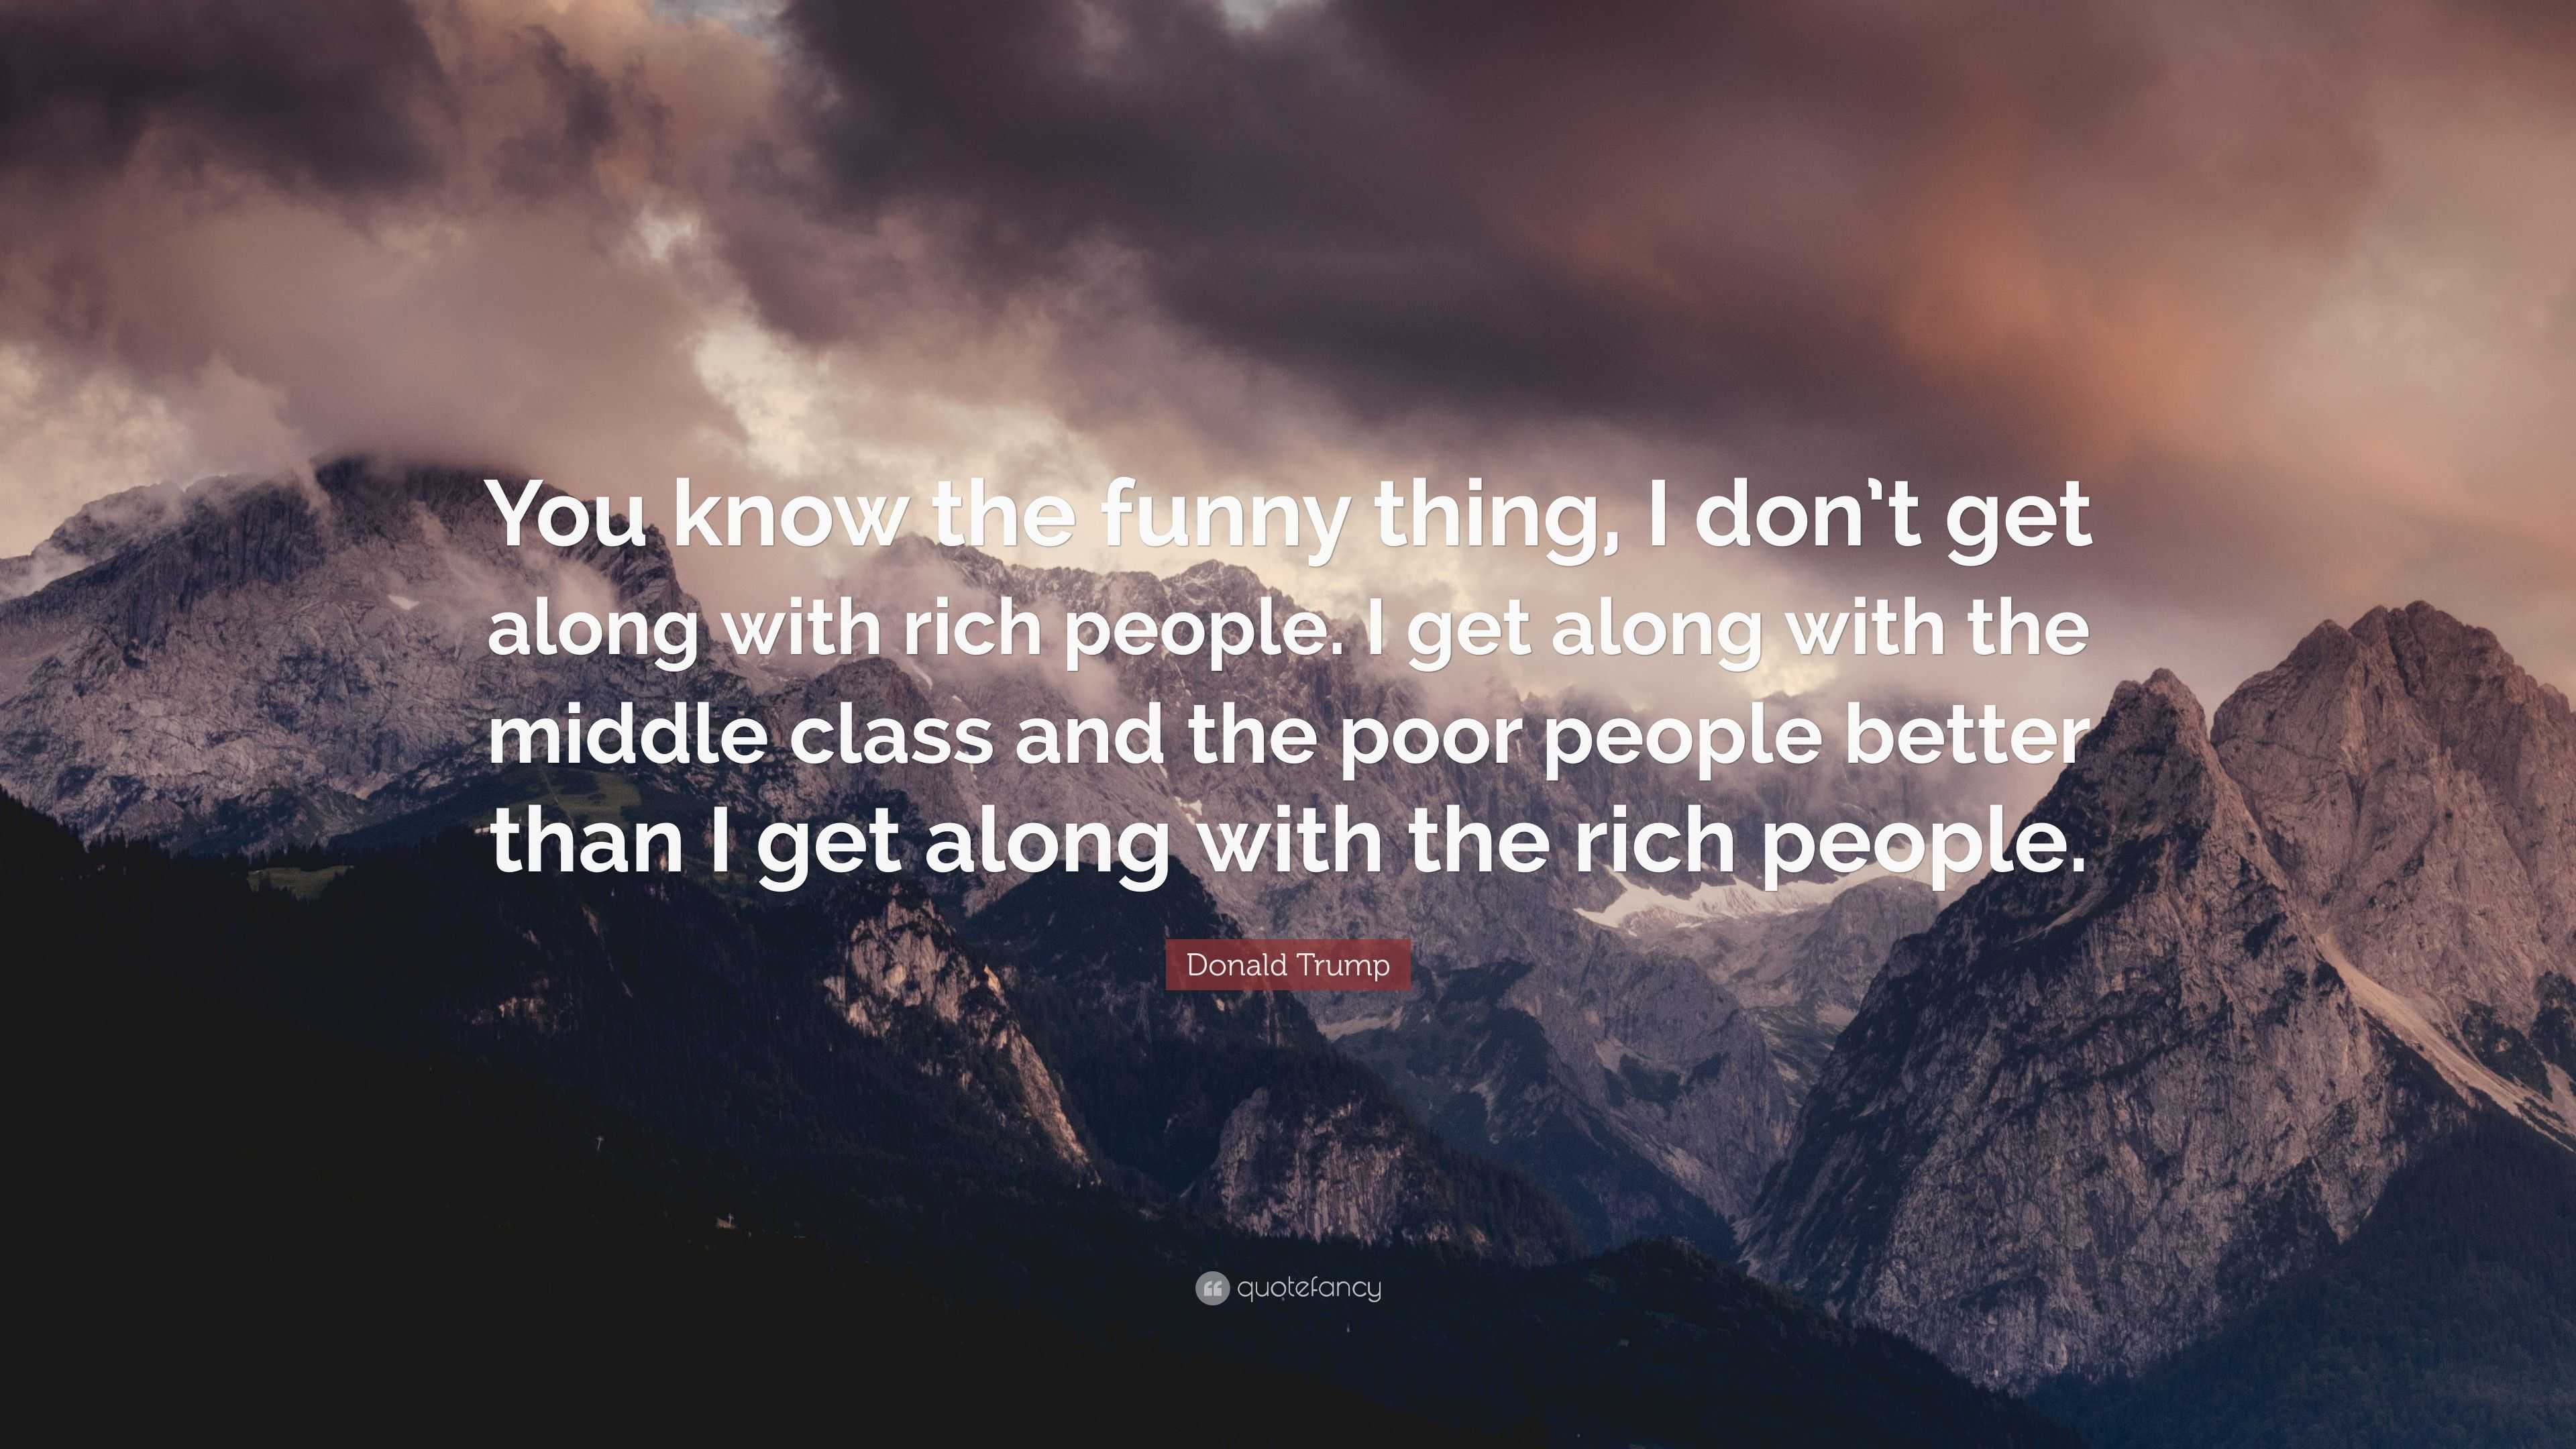 Donald Trump Quote: “You know the funny thing, I don't get along with rich  people. I get along with the middle class and the poor people bett...”